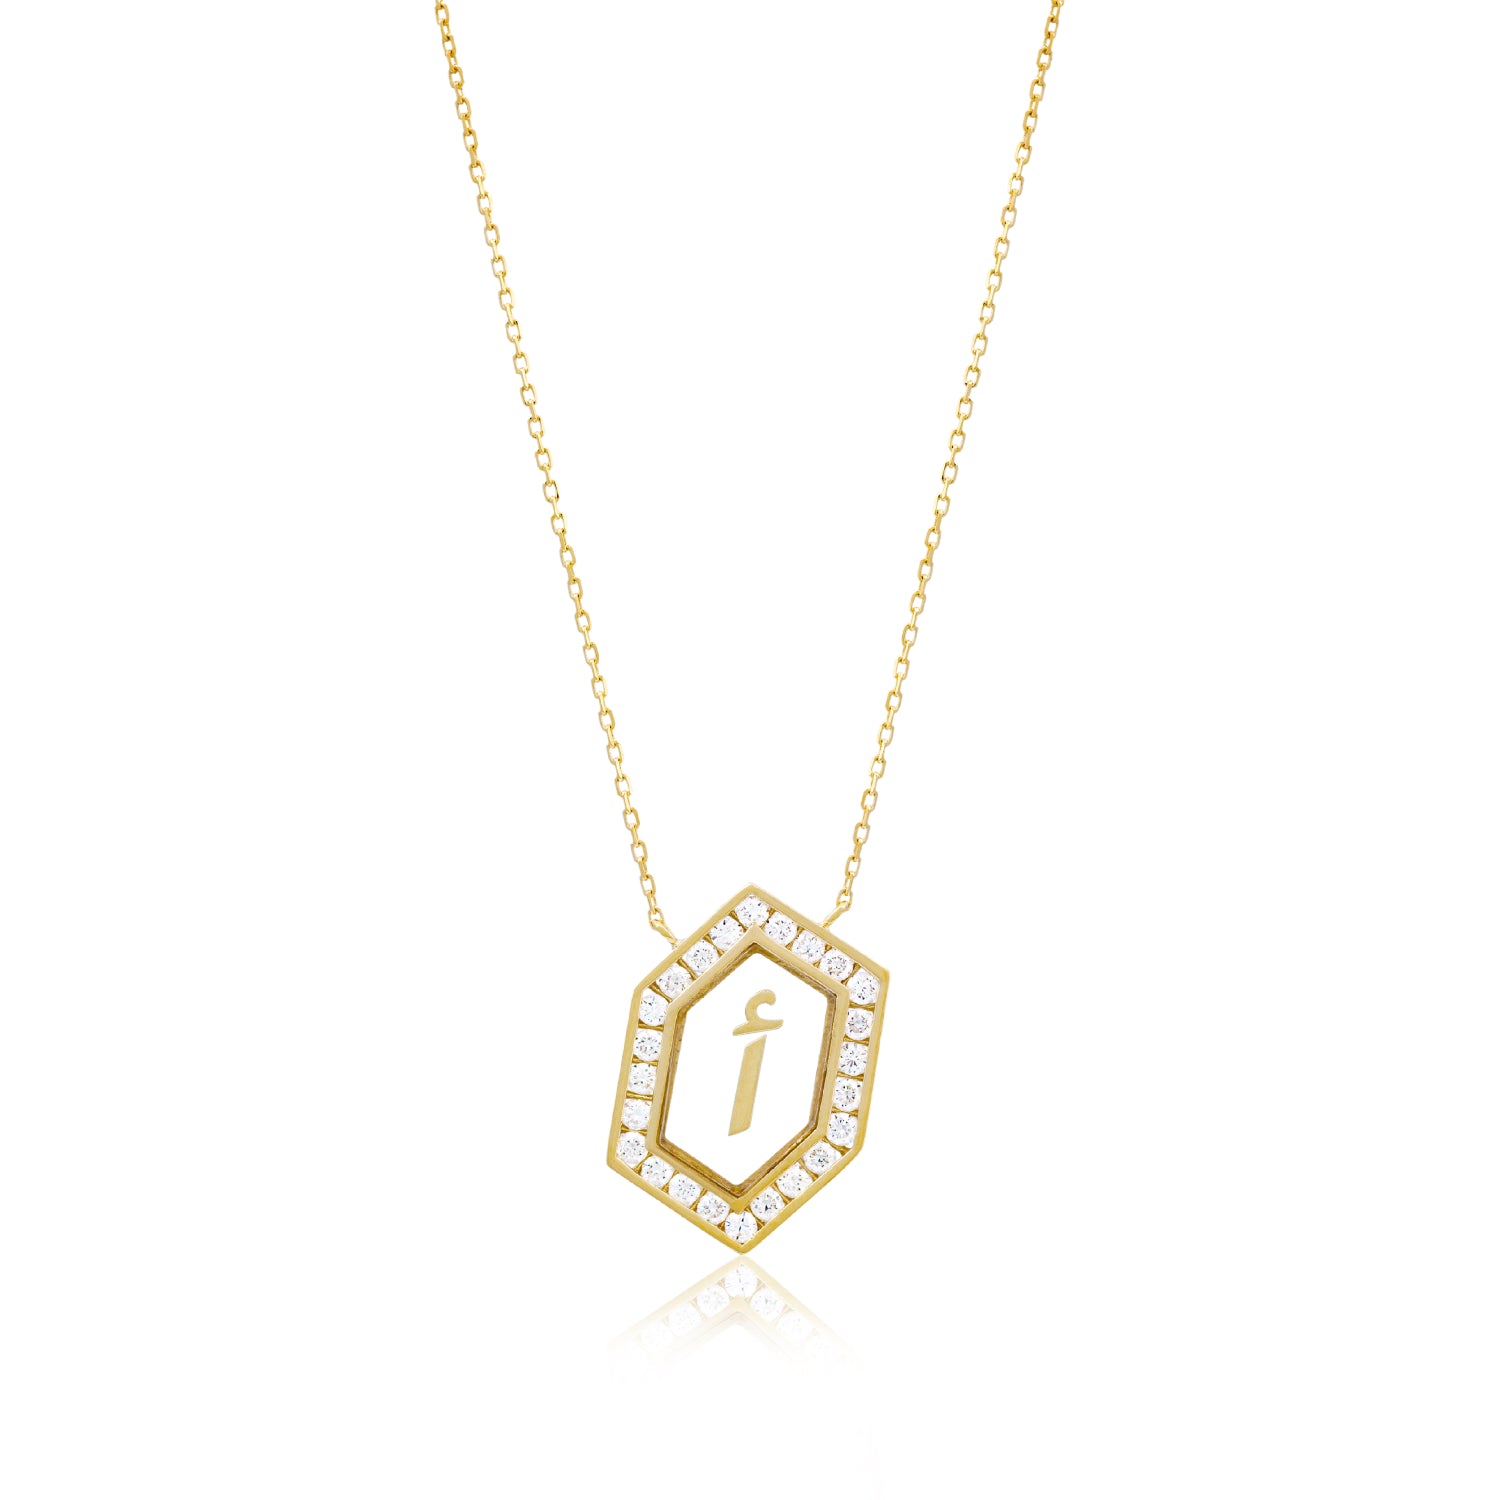 Qamoos 1.0 Letter أ Diamond Necklace in Yellow Gold